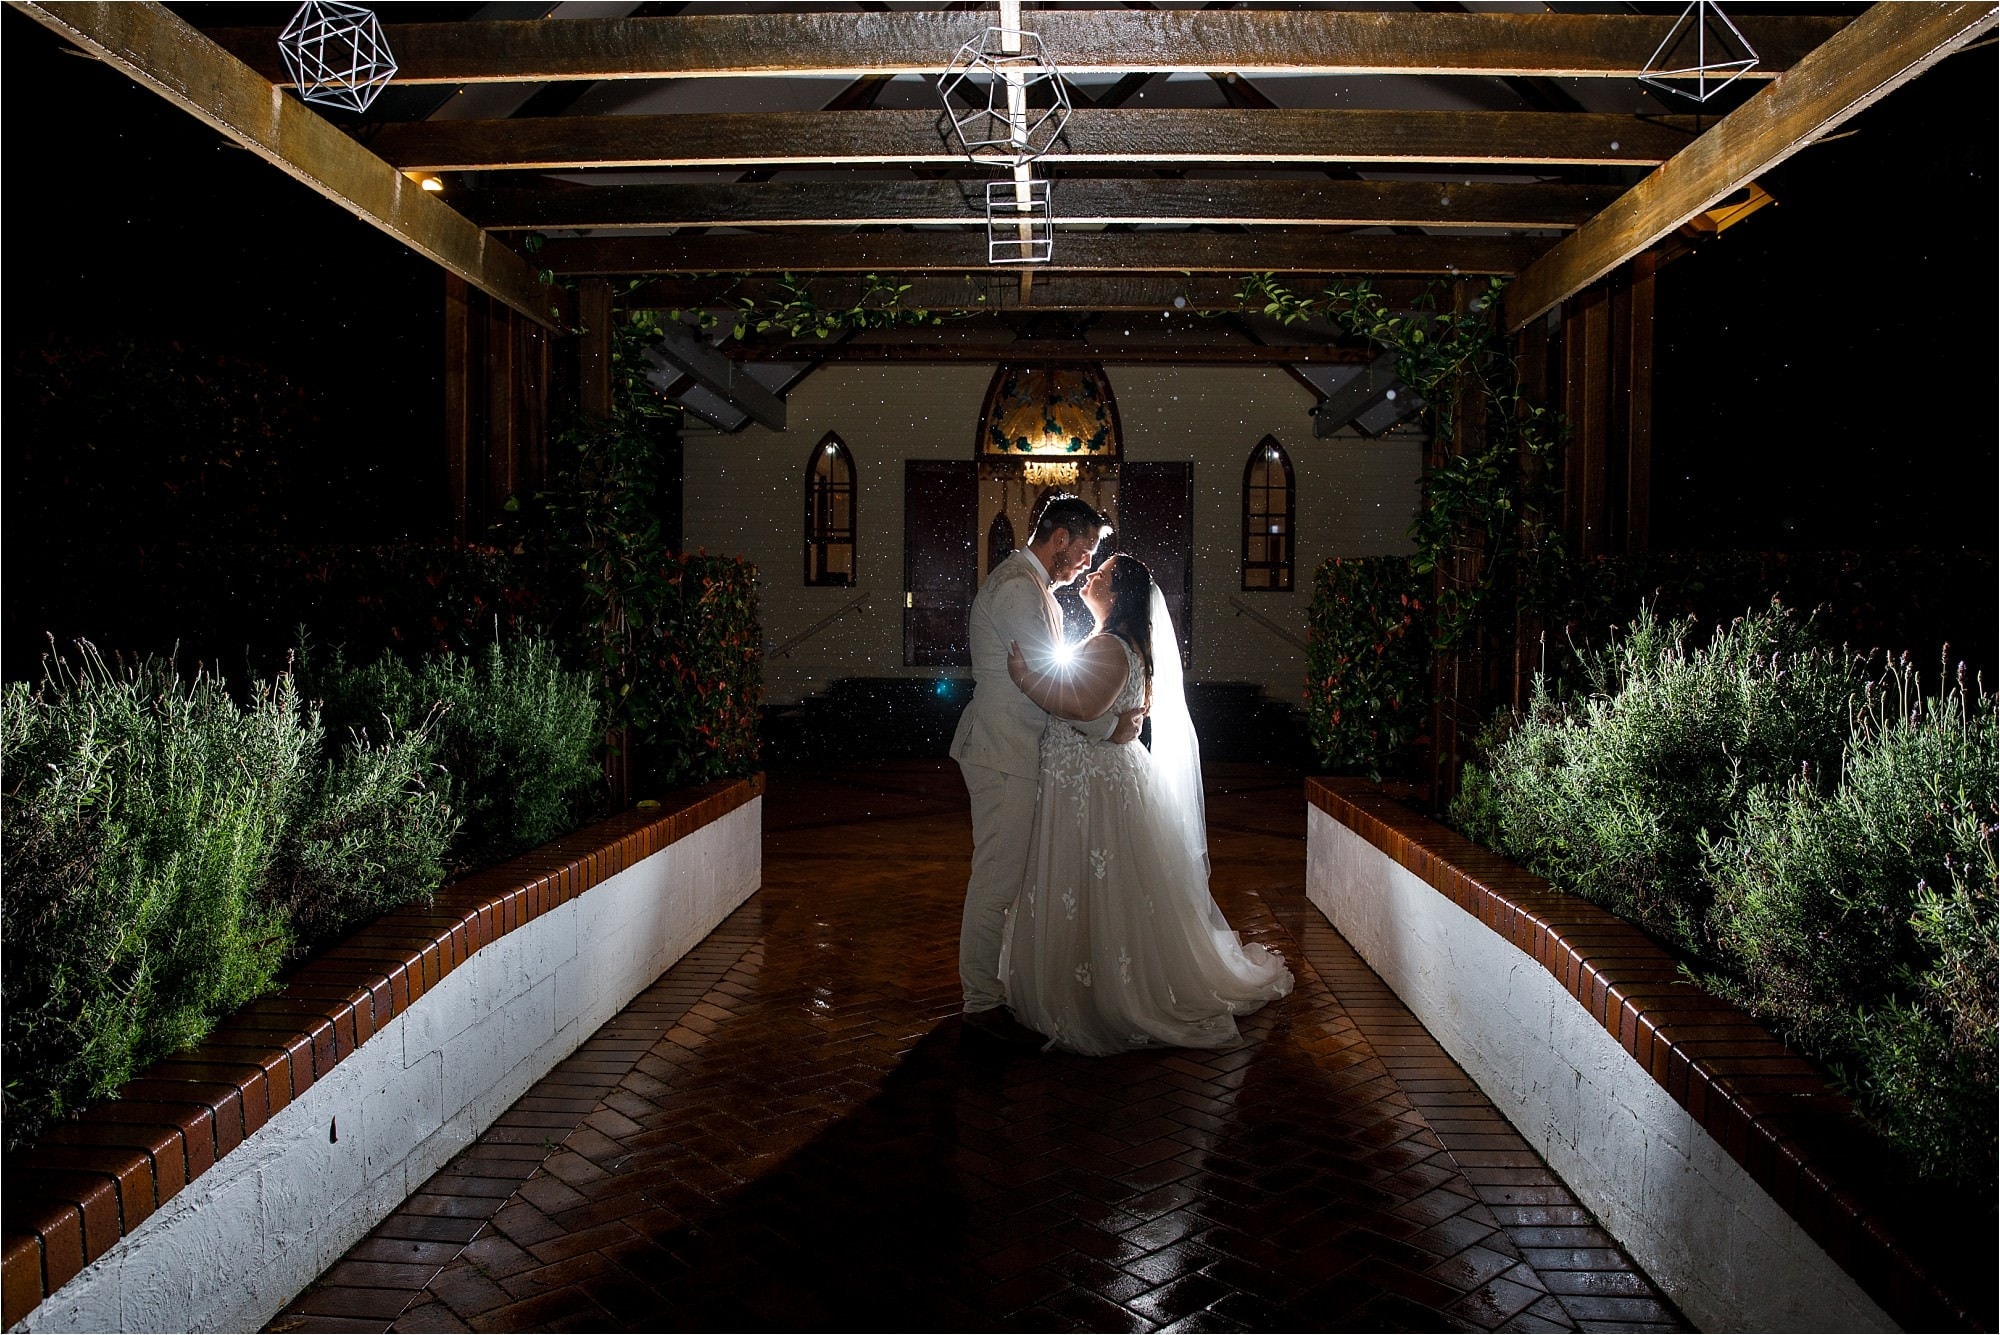 Wedding photography night image with lights by Mooi photography.